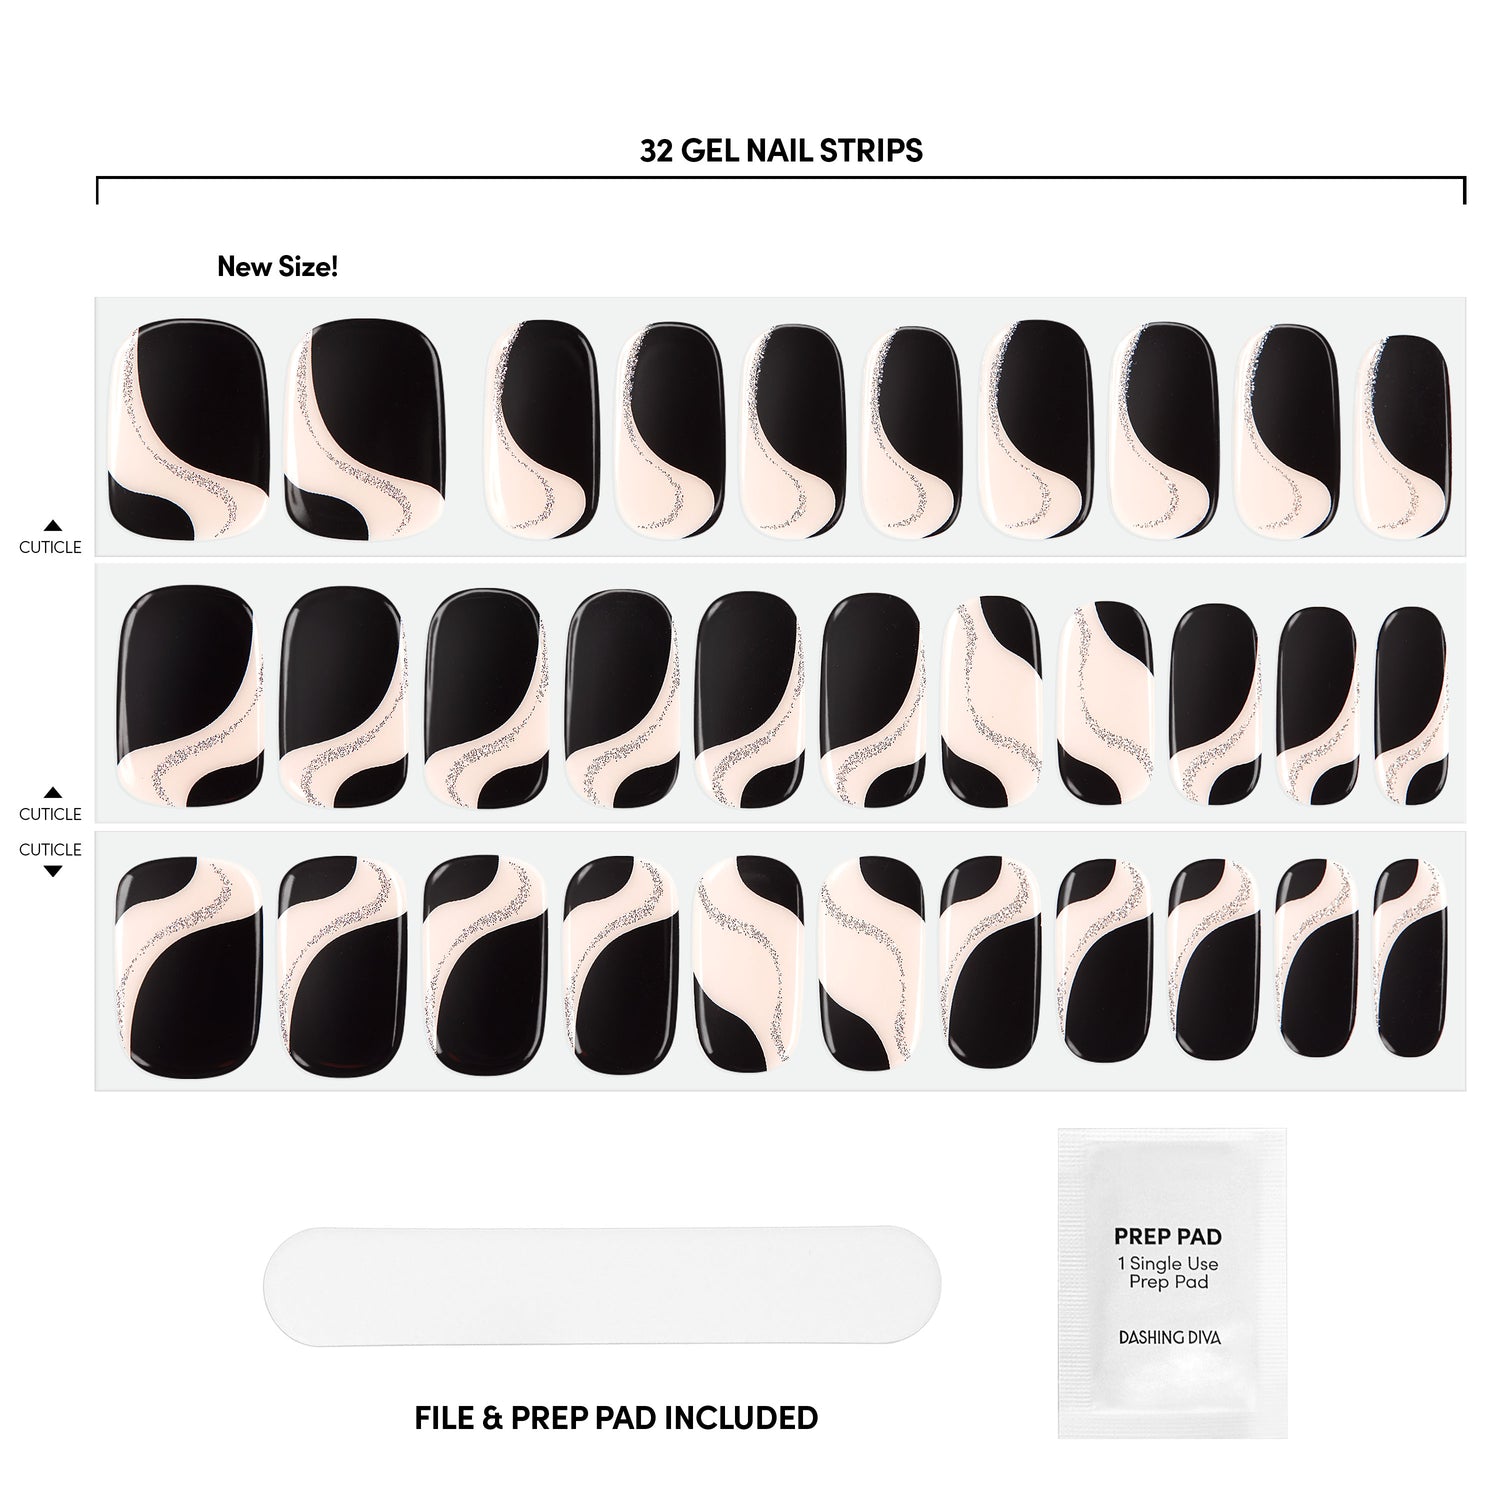  Nude gel nail strips featuring black abstract French and silver details